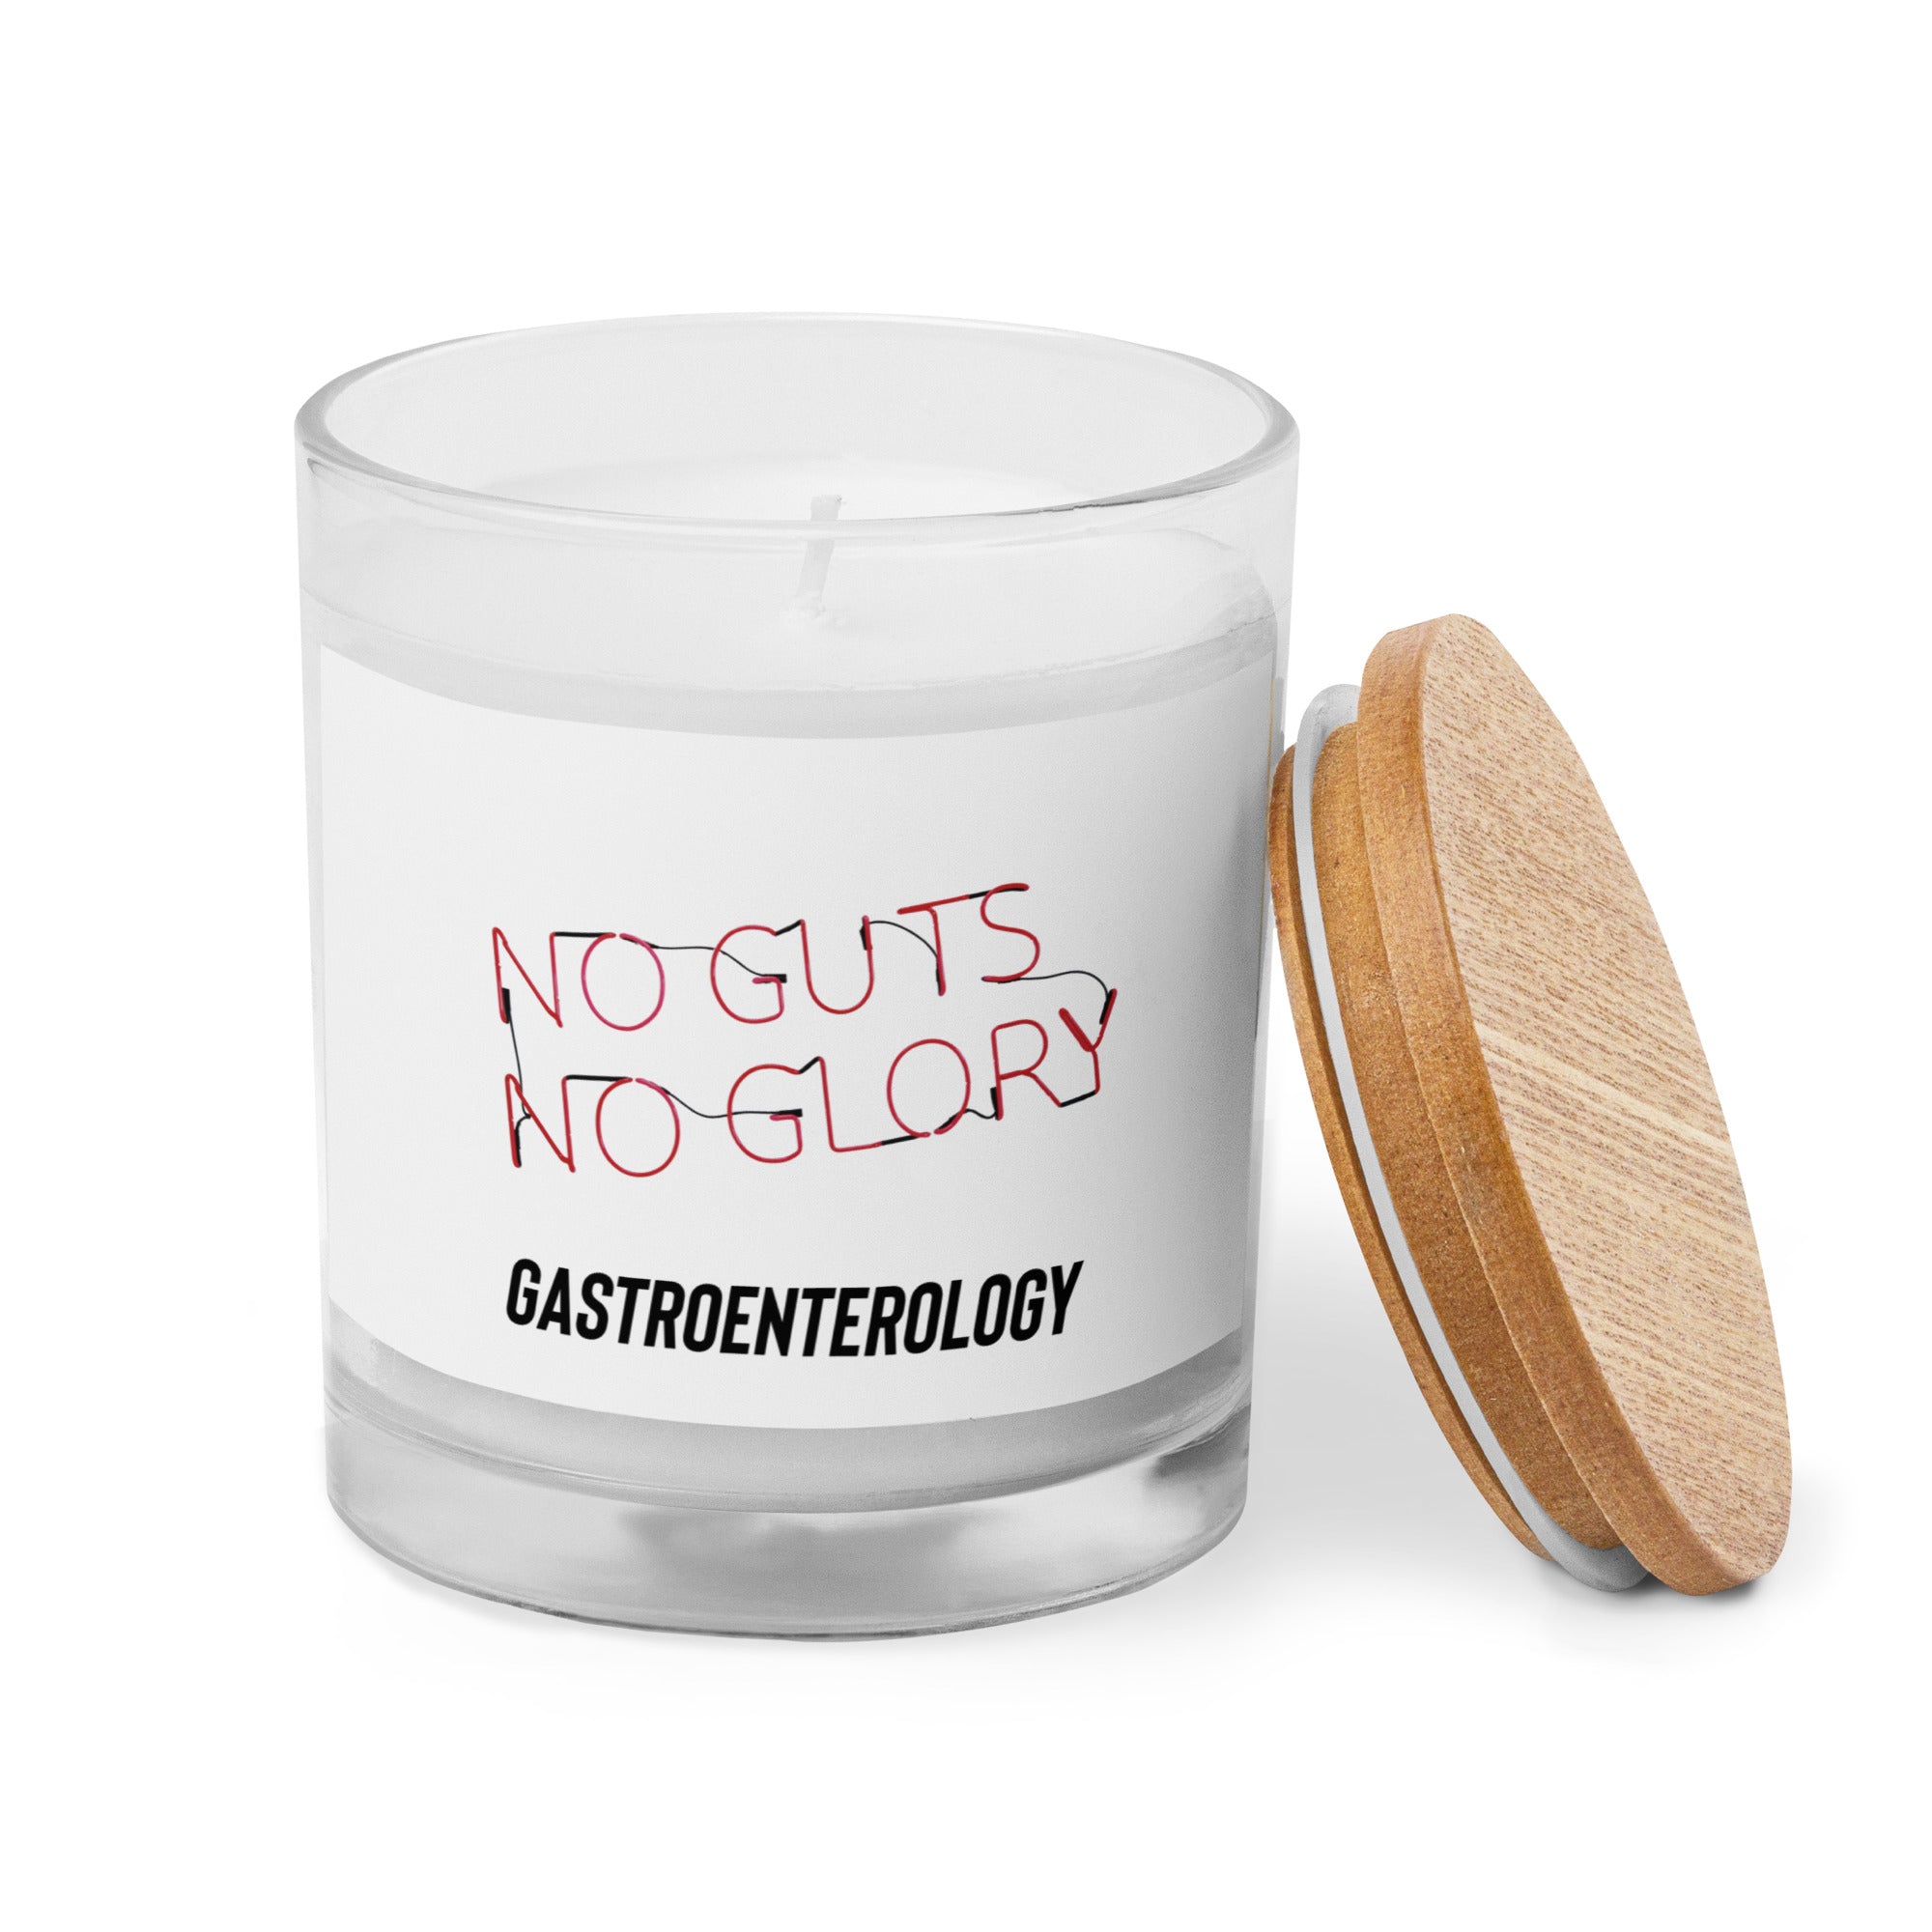 NO GUTS NOT GLORY Gastroenterology funny doctor gift Glass jar candle